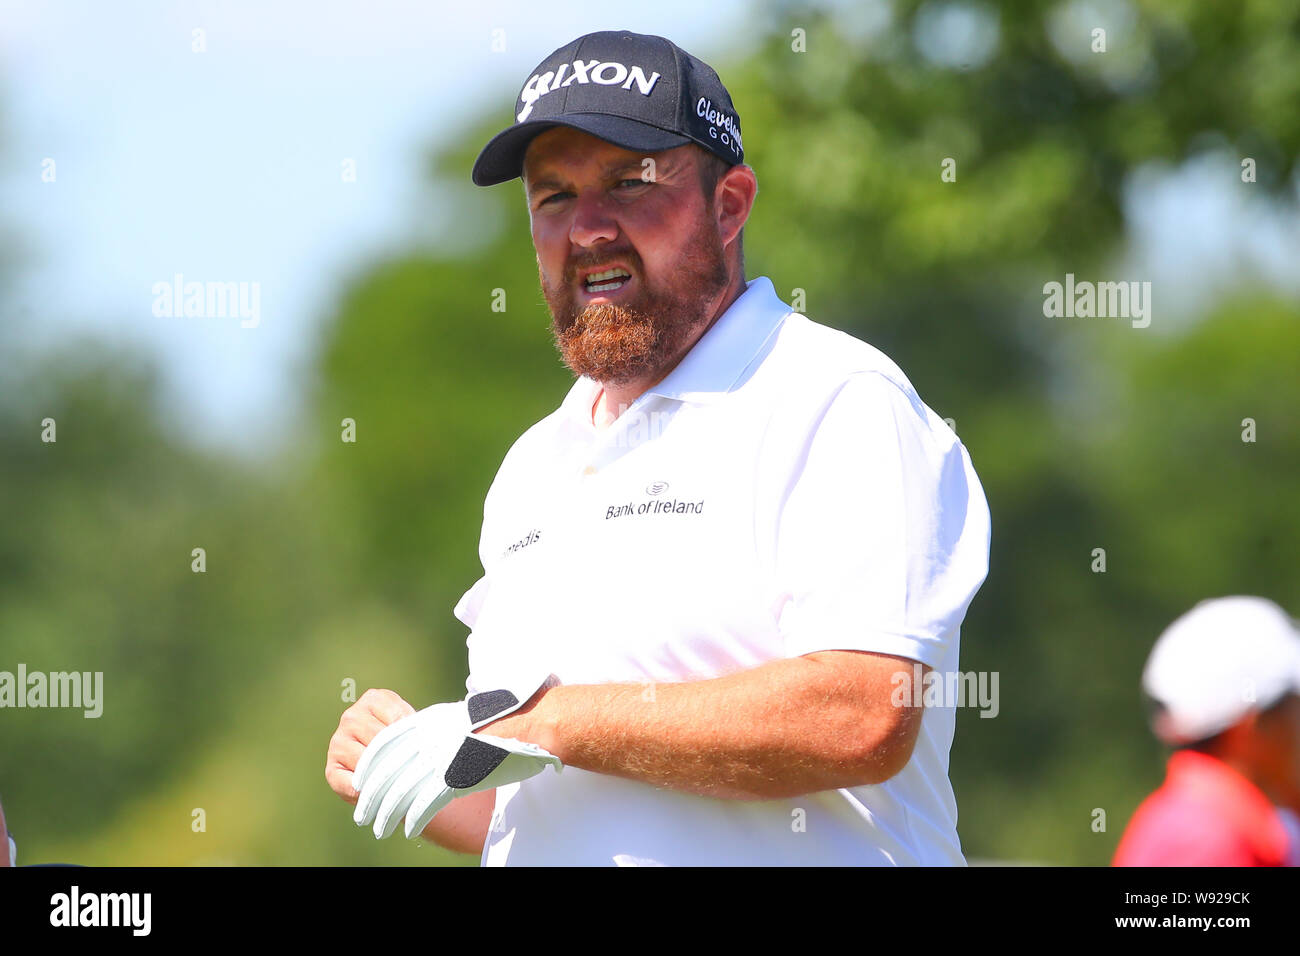 Jersey City, NJ, USA. 11th Aug, 2019. Shane Lowry of Ireland on the 2nd tee during the final round of the Northern Trust golf tournament on August 11, 2019 at Liberty National Golf Club in Jersey City, NJ. Credit: Action Plus Sports/Alamy Live News Stock Photo